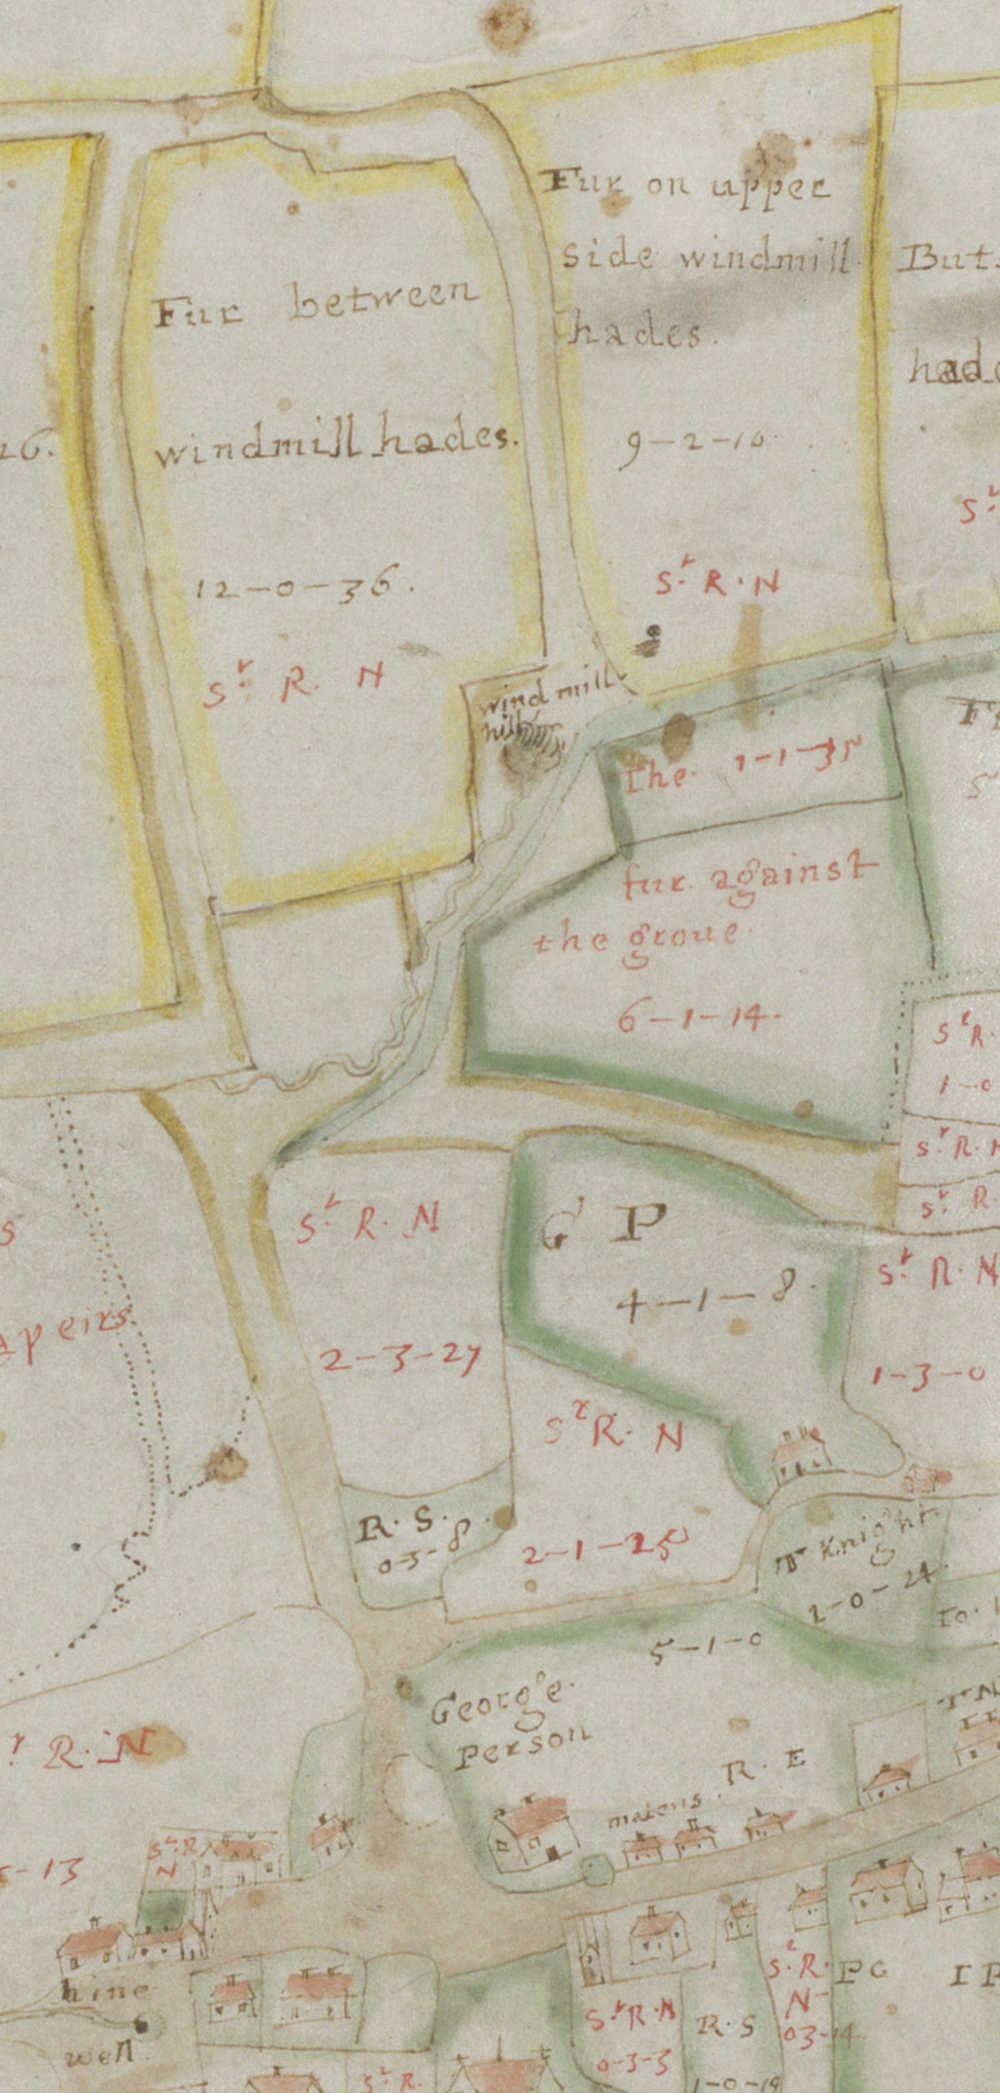 1641 Estate Map of Great Linford showing Windmill Hill.